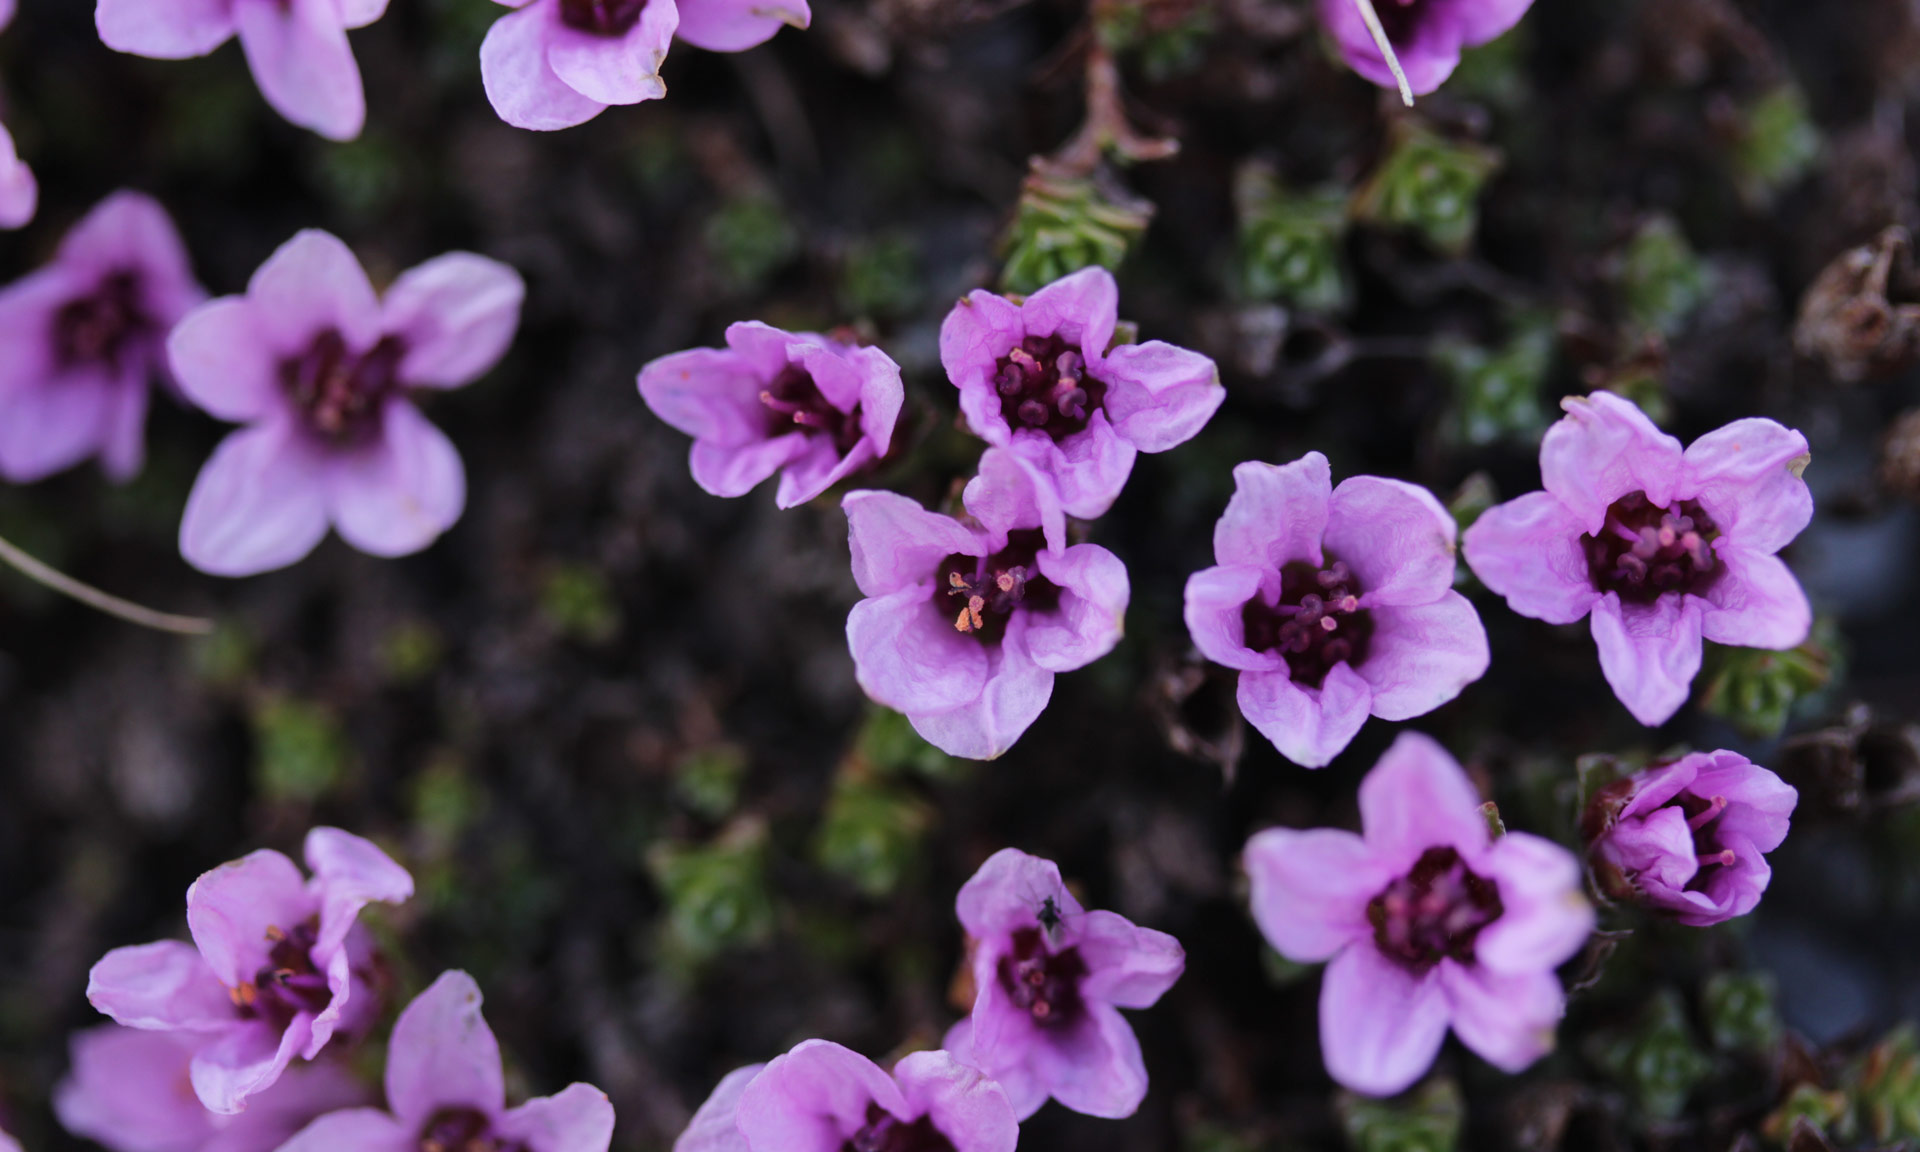 The purple flowers of the purple saxifrage 